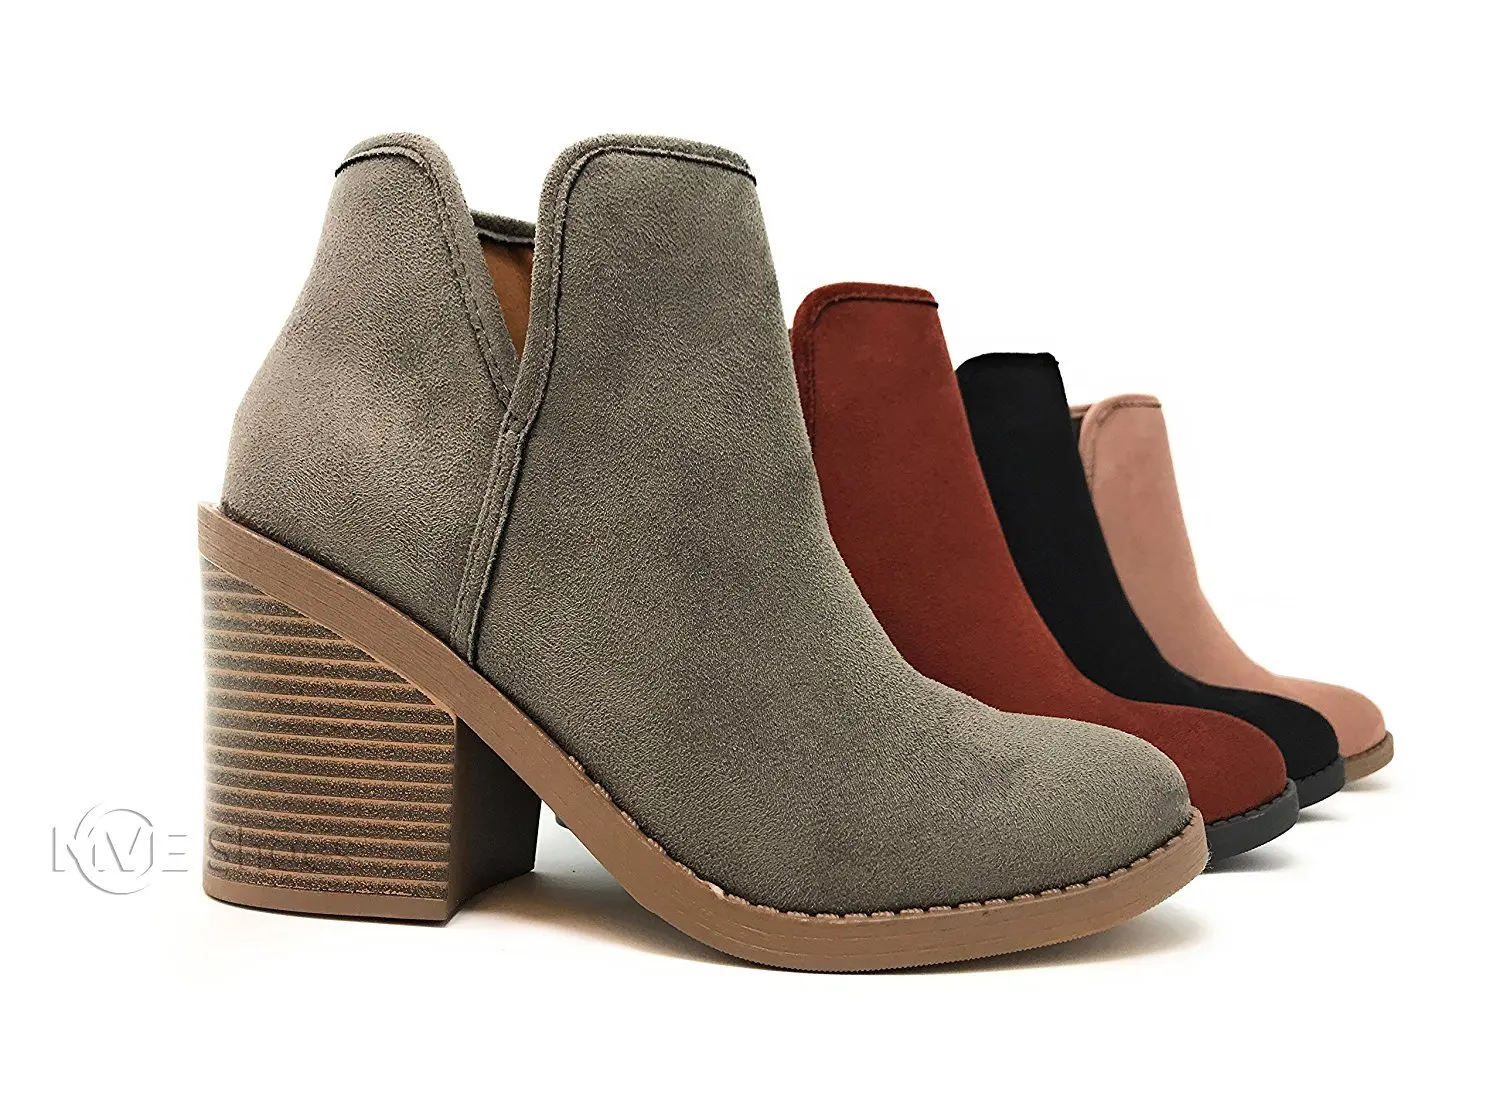 soda perforated booties